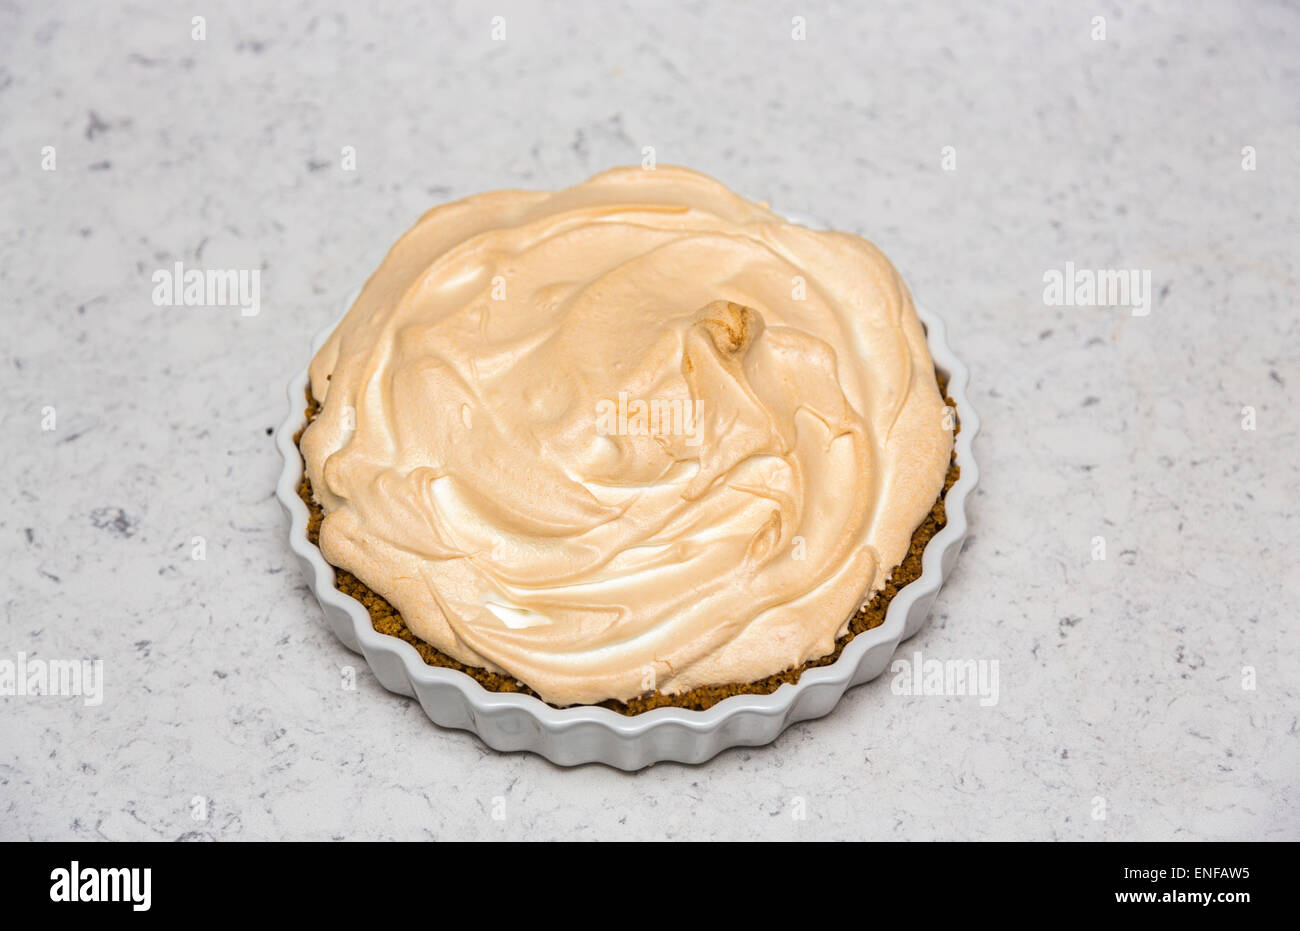 Fresh, delicious home cooked lemon meringue pie in a round white scalloped pie dish Stock Photo